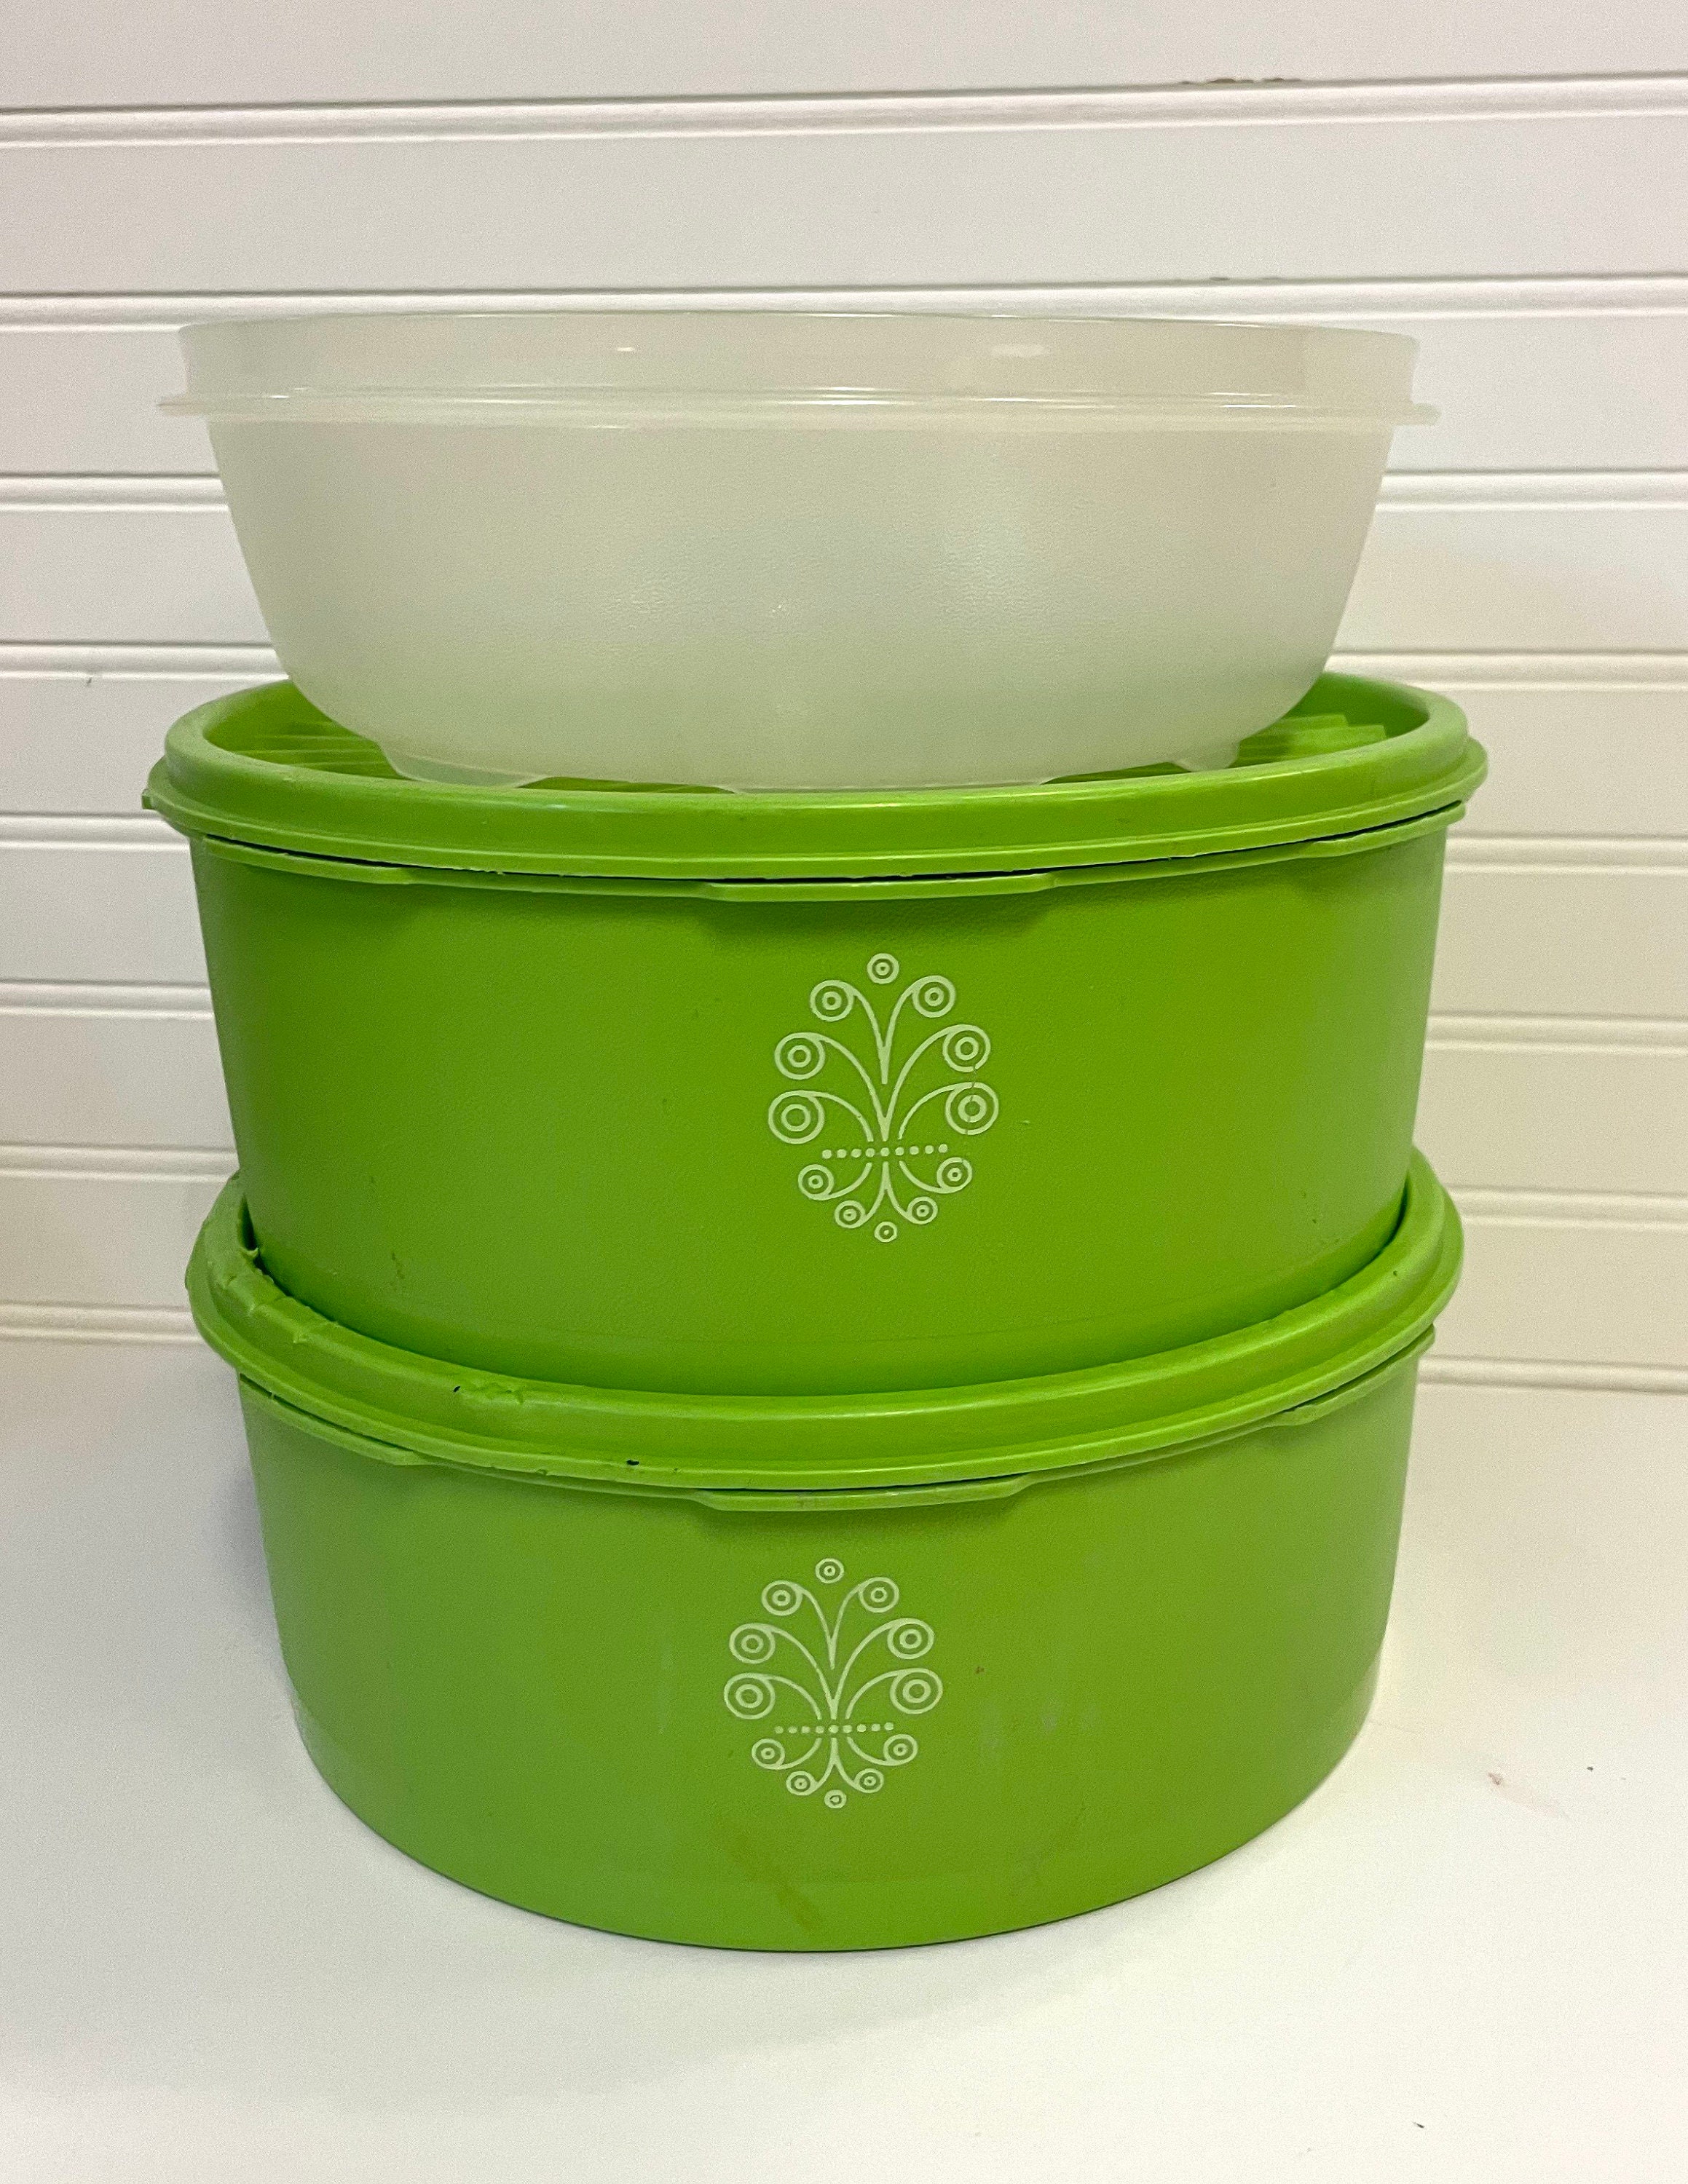 Vintage Green Tupperware Canisters Apple Green Kitchen Canisters 2 Retro  Tupperware Canisters Servalier 